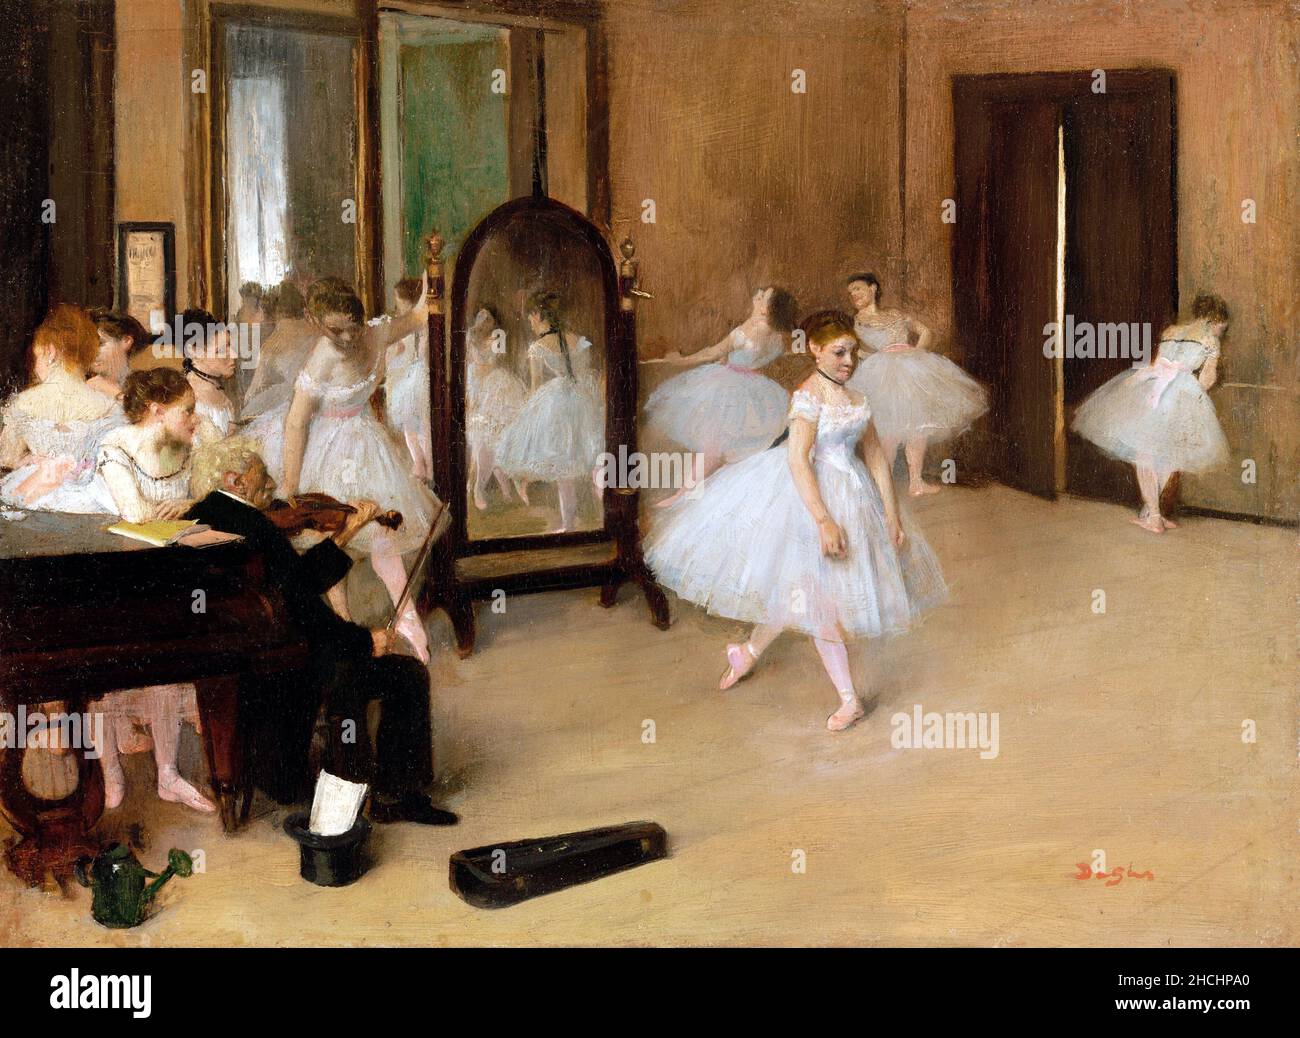 The Dancing Class (ca. 1870) painting in high resolution by Edgar Degas. Stock Photo